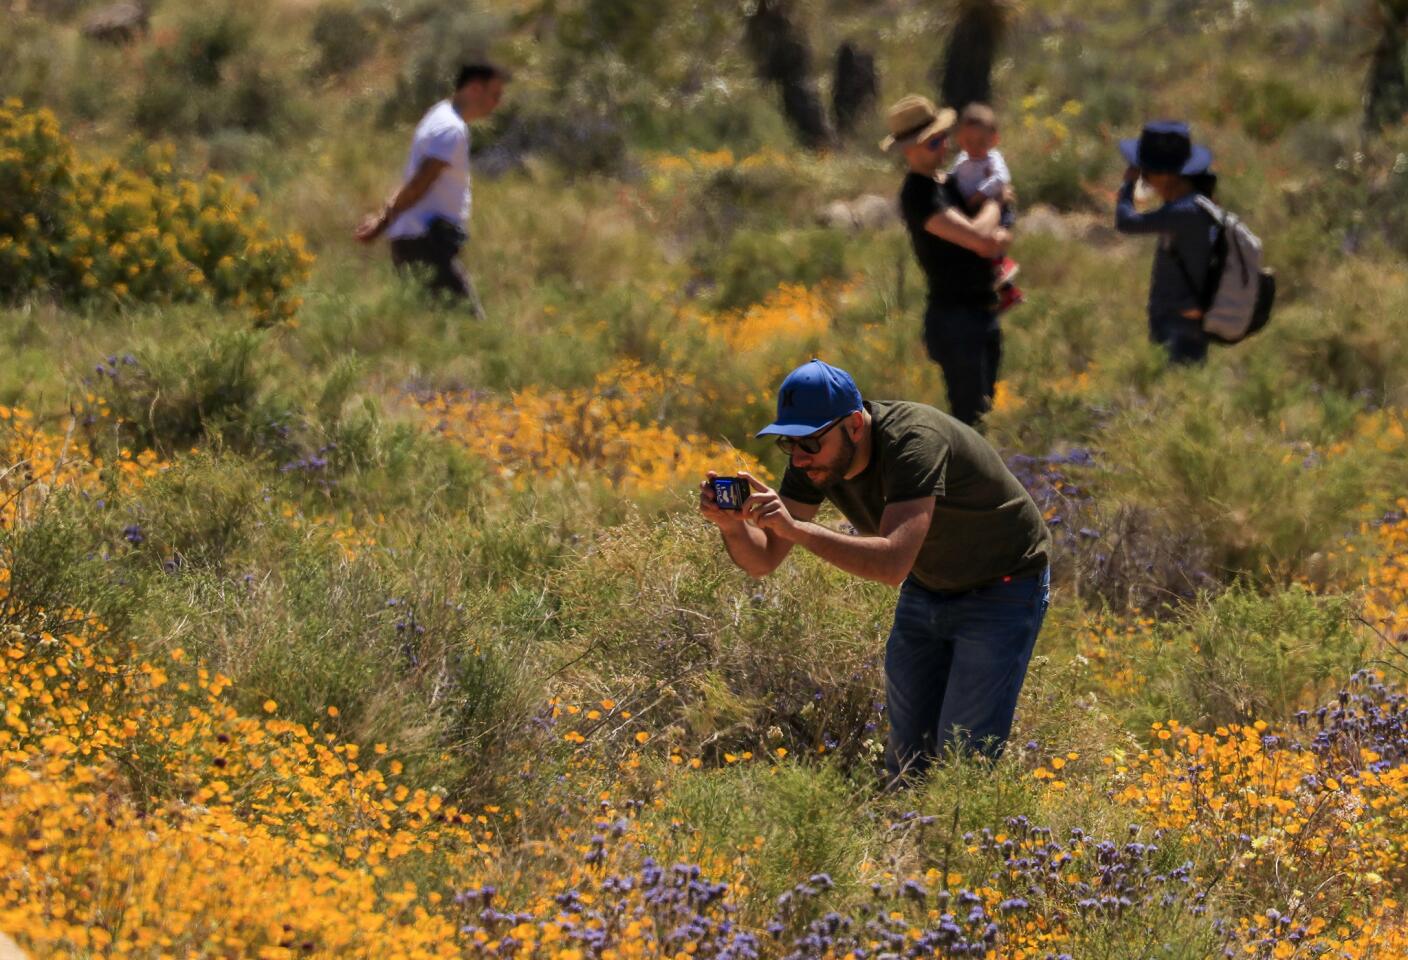 The display of wildflowers all over Joshua Tree National Park makes for many photo-worthy moments.